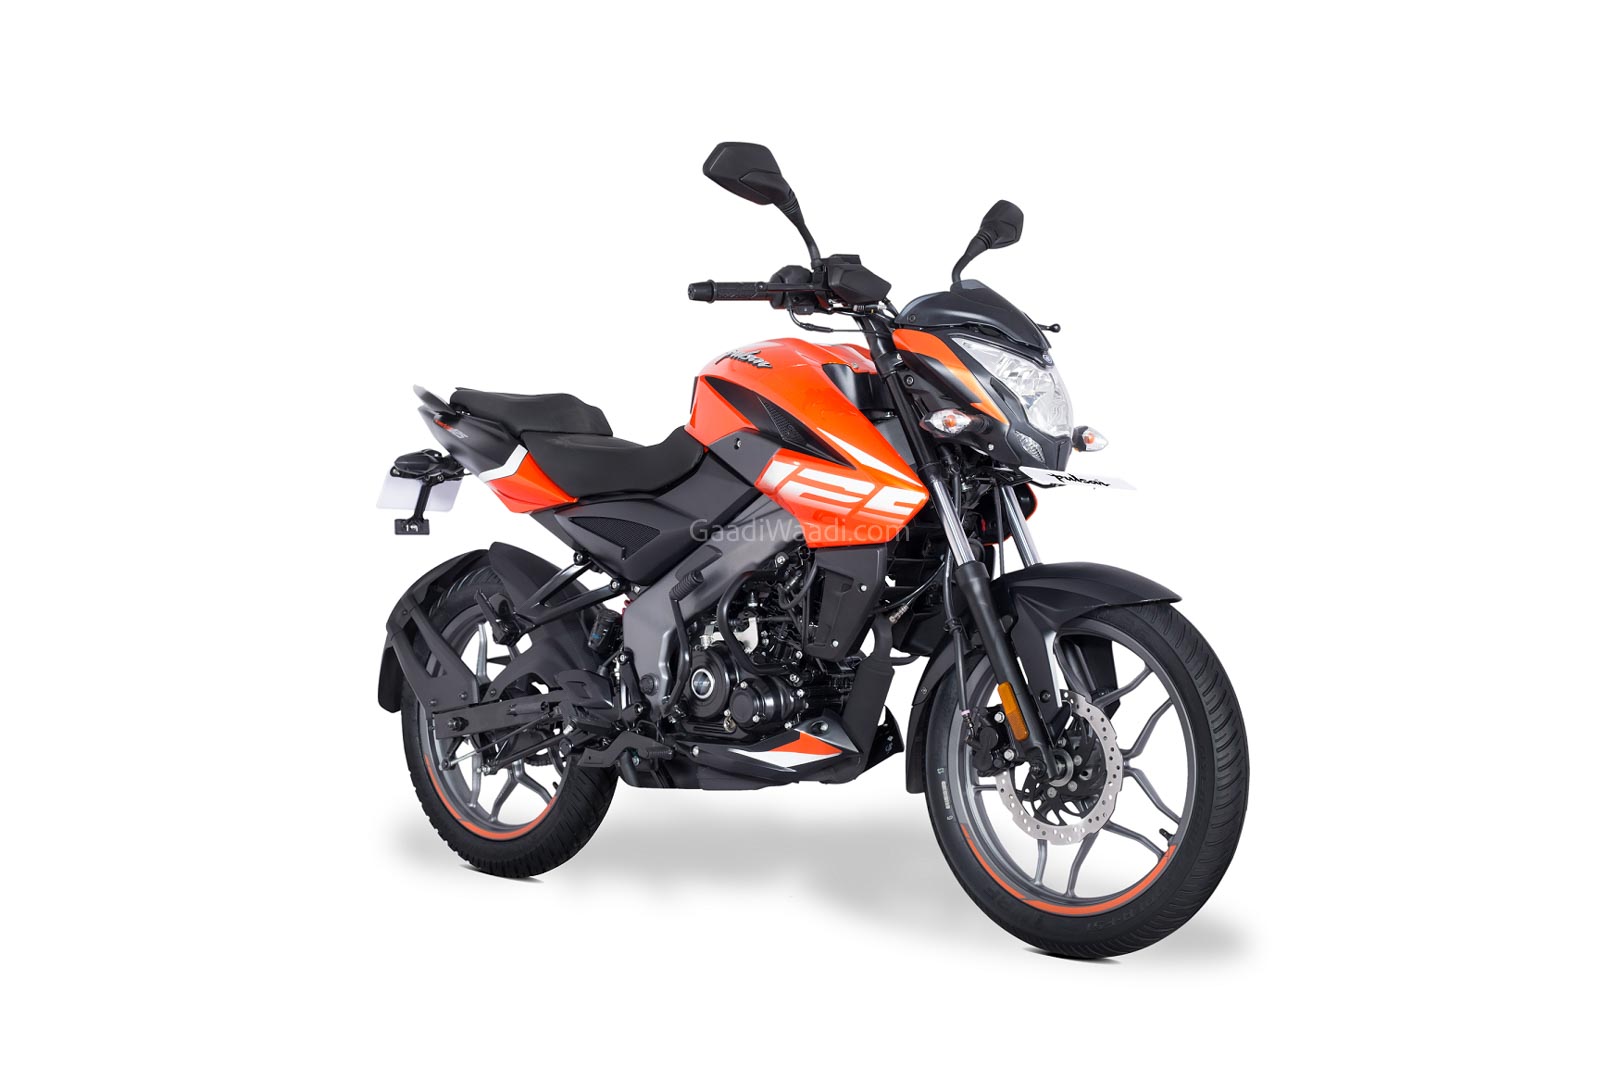 Bajaj Pulsar NS 125 Launched In India; Priced At Rs. 93,690